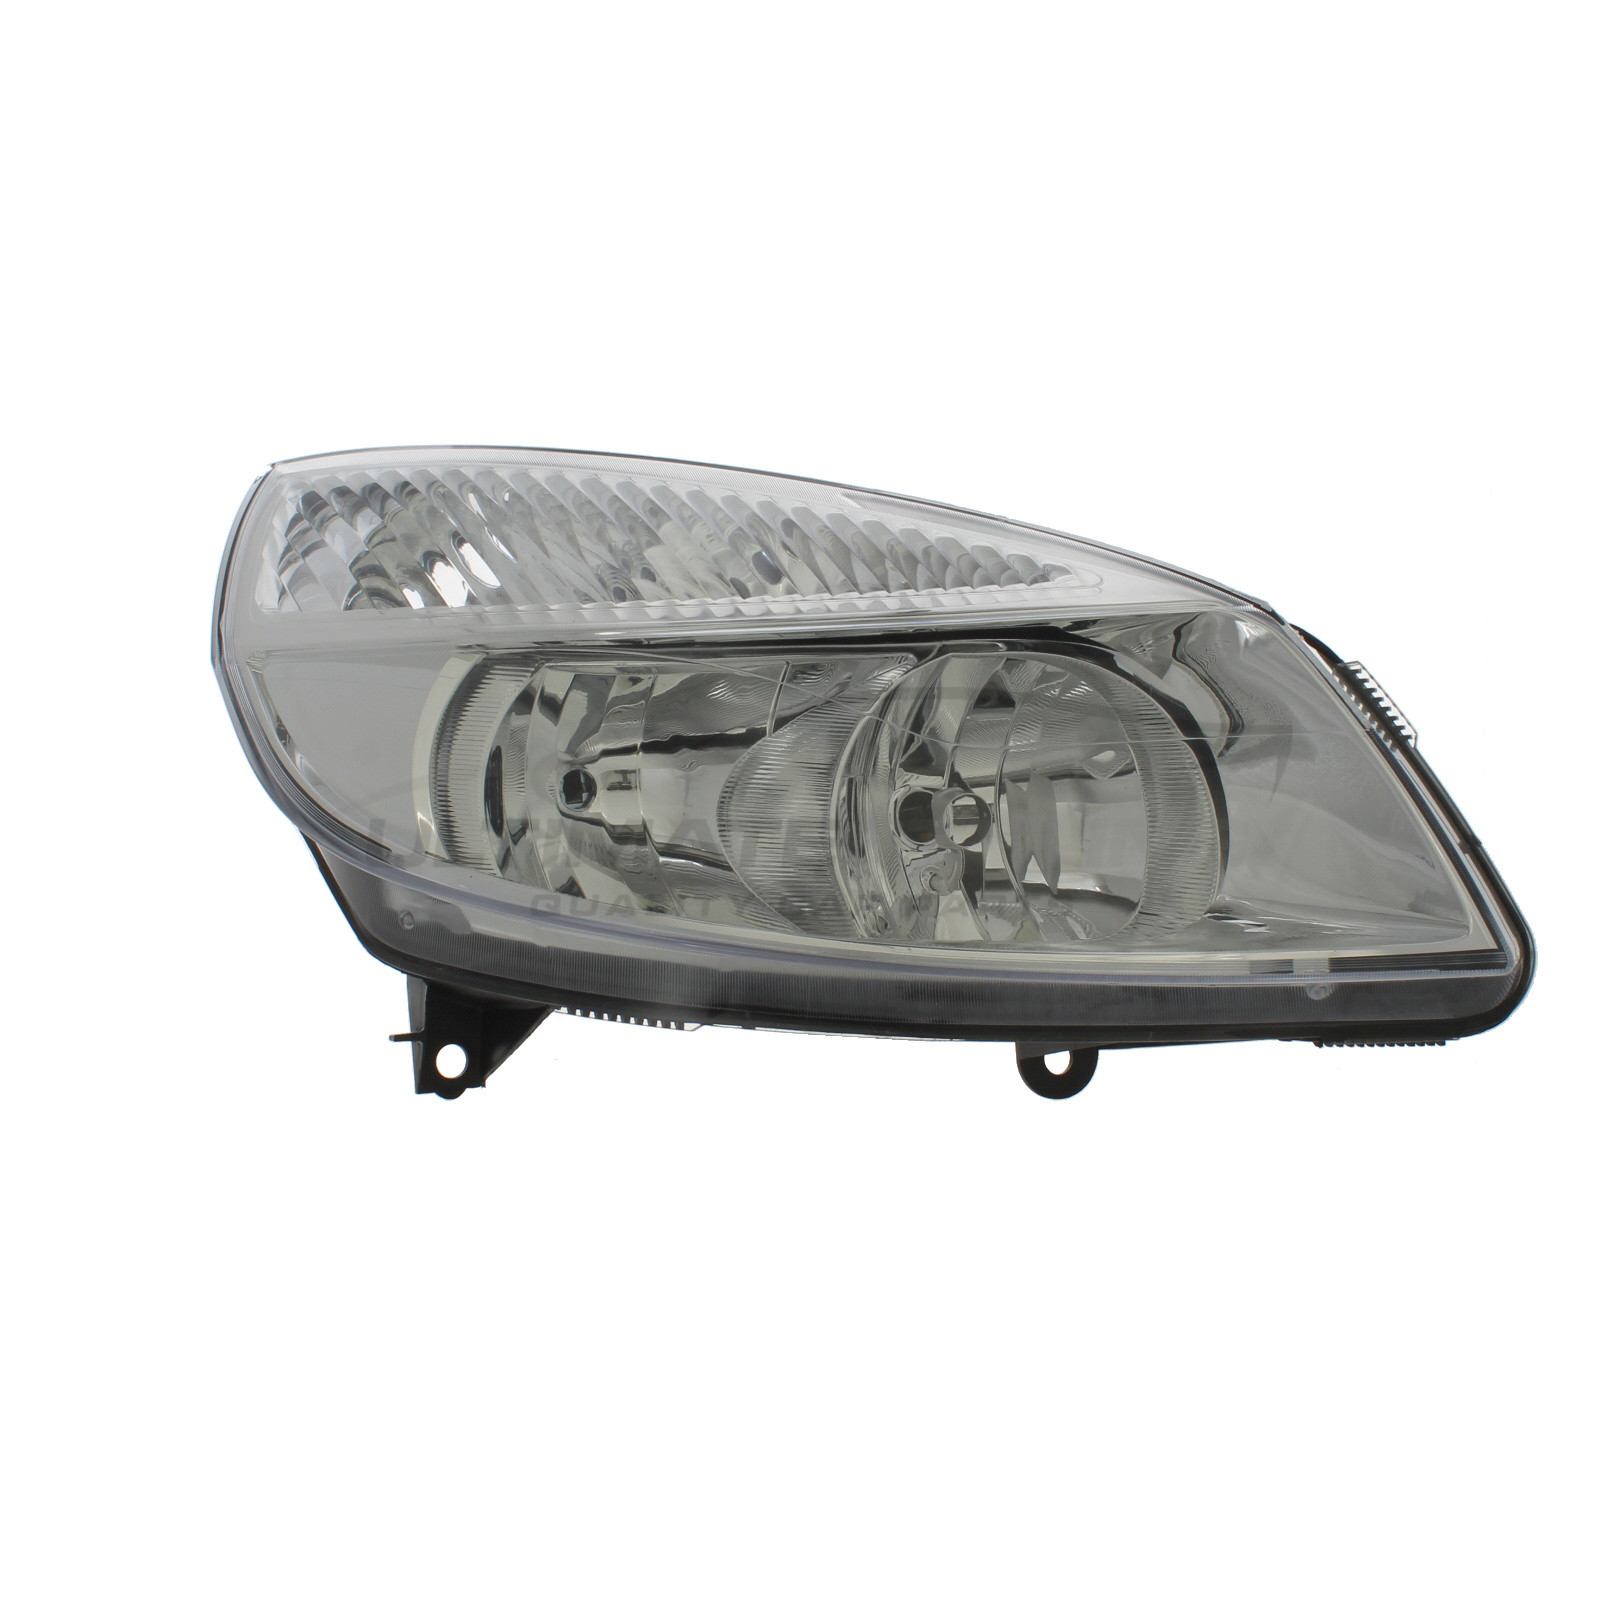 Renault Scenic 2003-2006 Halogen, Electric Without Motor, Chrome Headlight / Headlamp Drivers Side (RH)